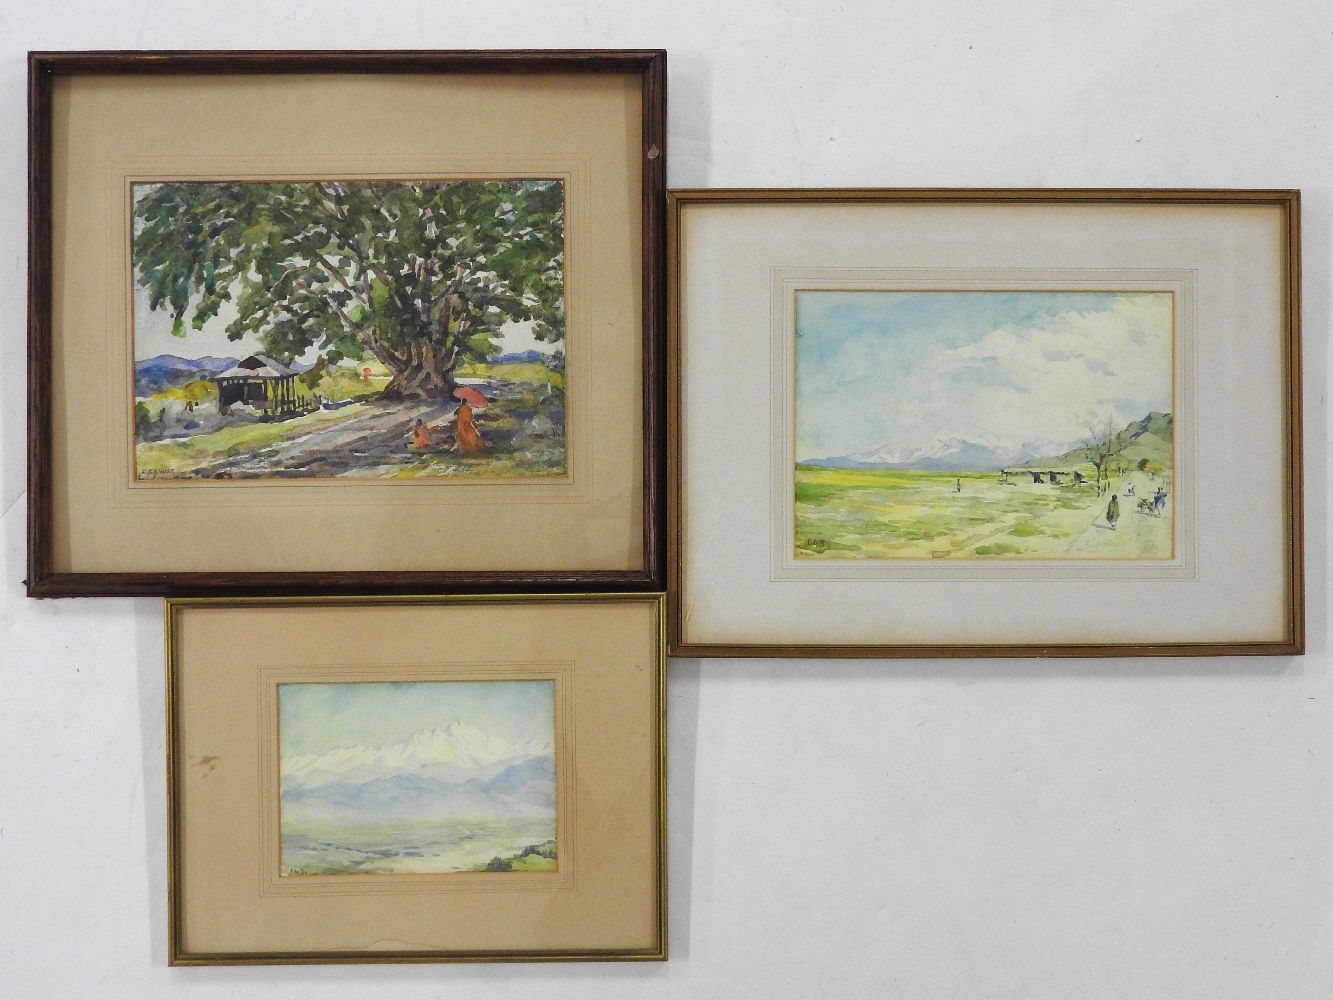 HIMALAYAN SUBJECTS, MOUNTAINOUS LANDSCAPESTwo, framed and glazed27 x 25cm and 24 c 34cmE F A WiseA - Image 2 of 2